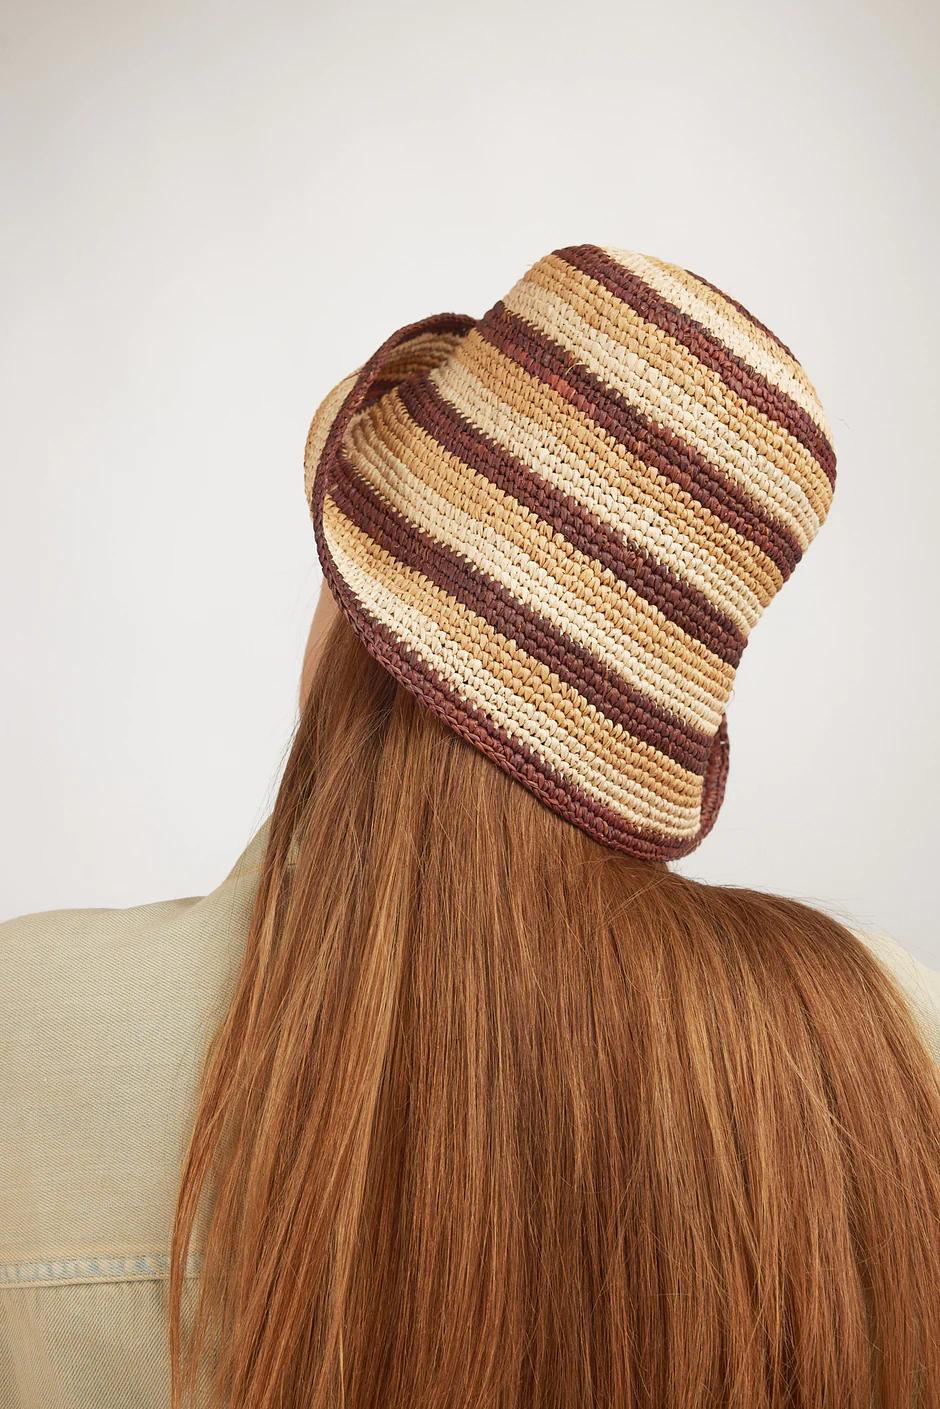 Product Image for Opia Hat, Cream & Brown Striped Toquilla Straw